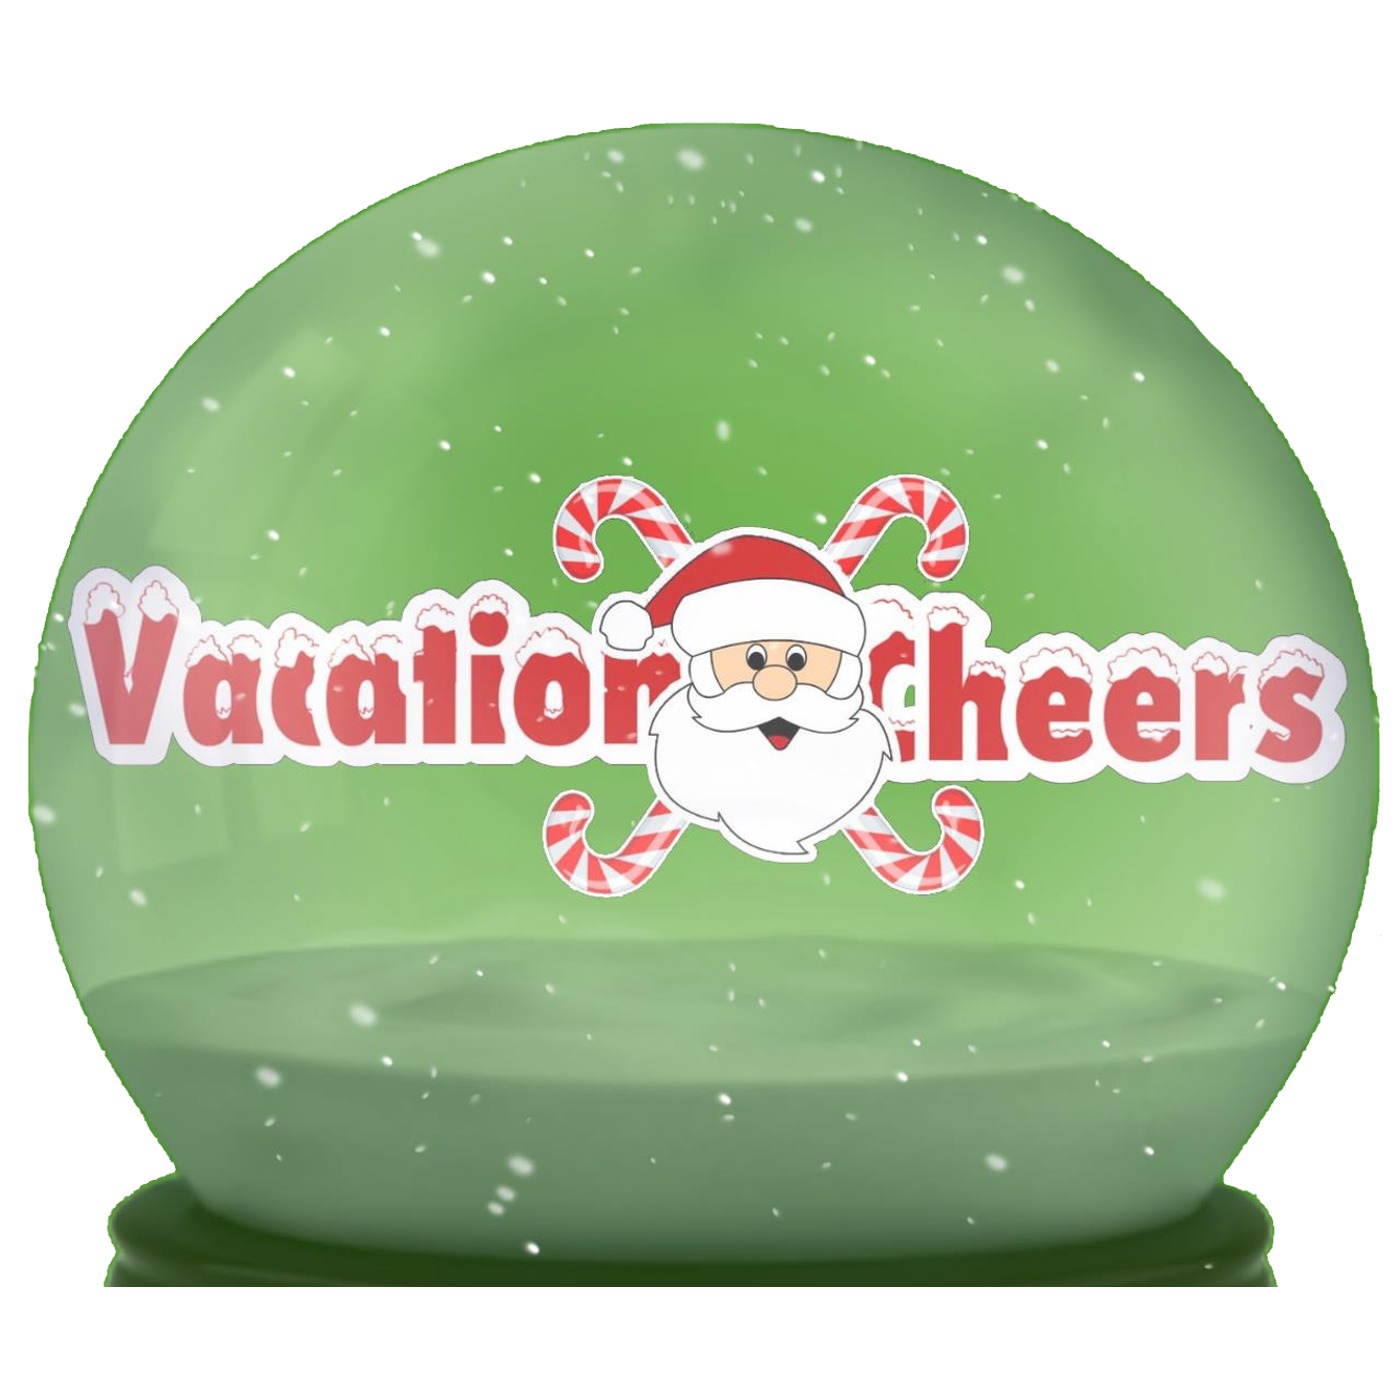 VacationCheers 191: Epcot International Festival of the Holidays, Celebration Now Snowing & Old Town